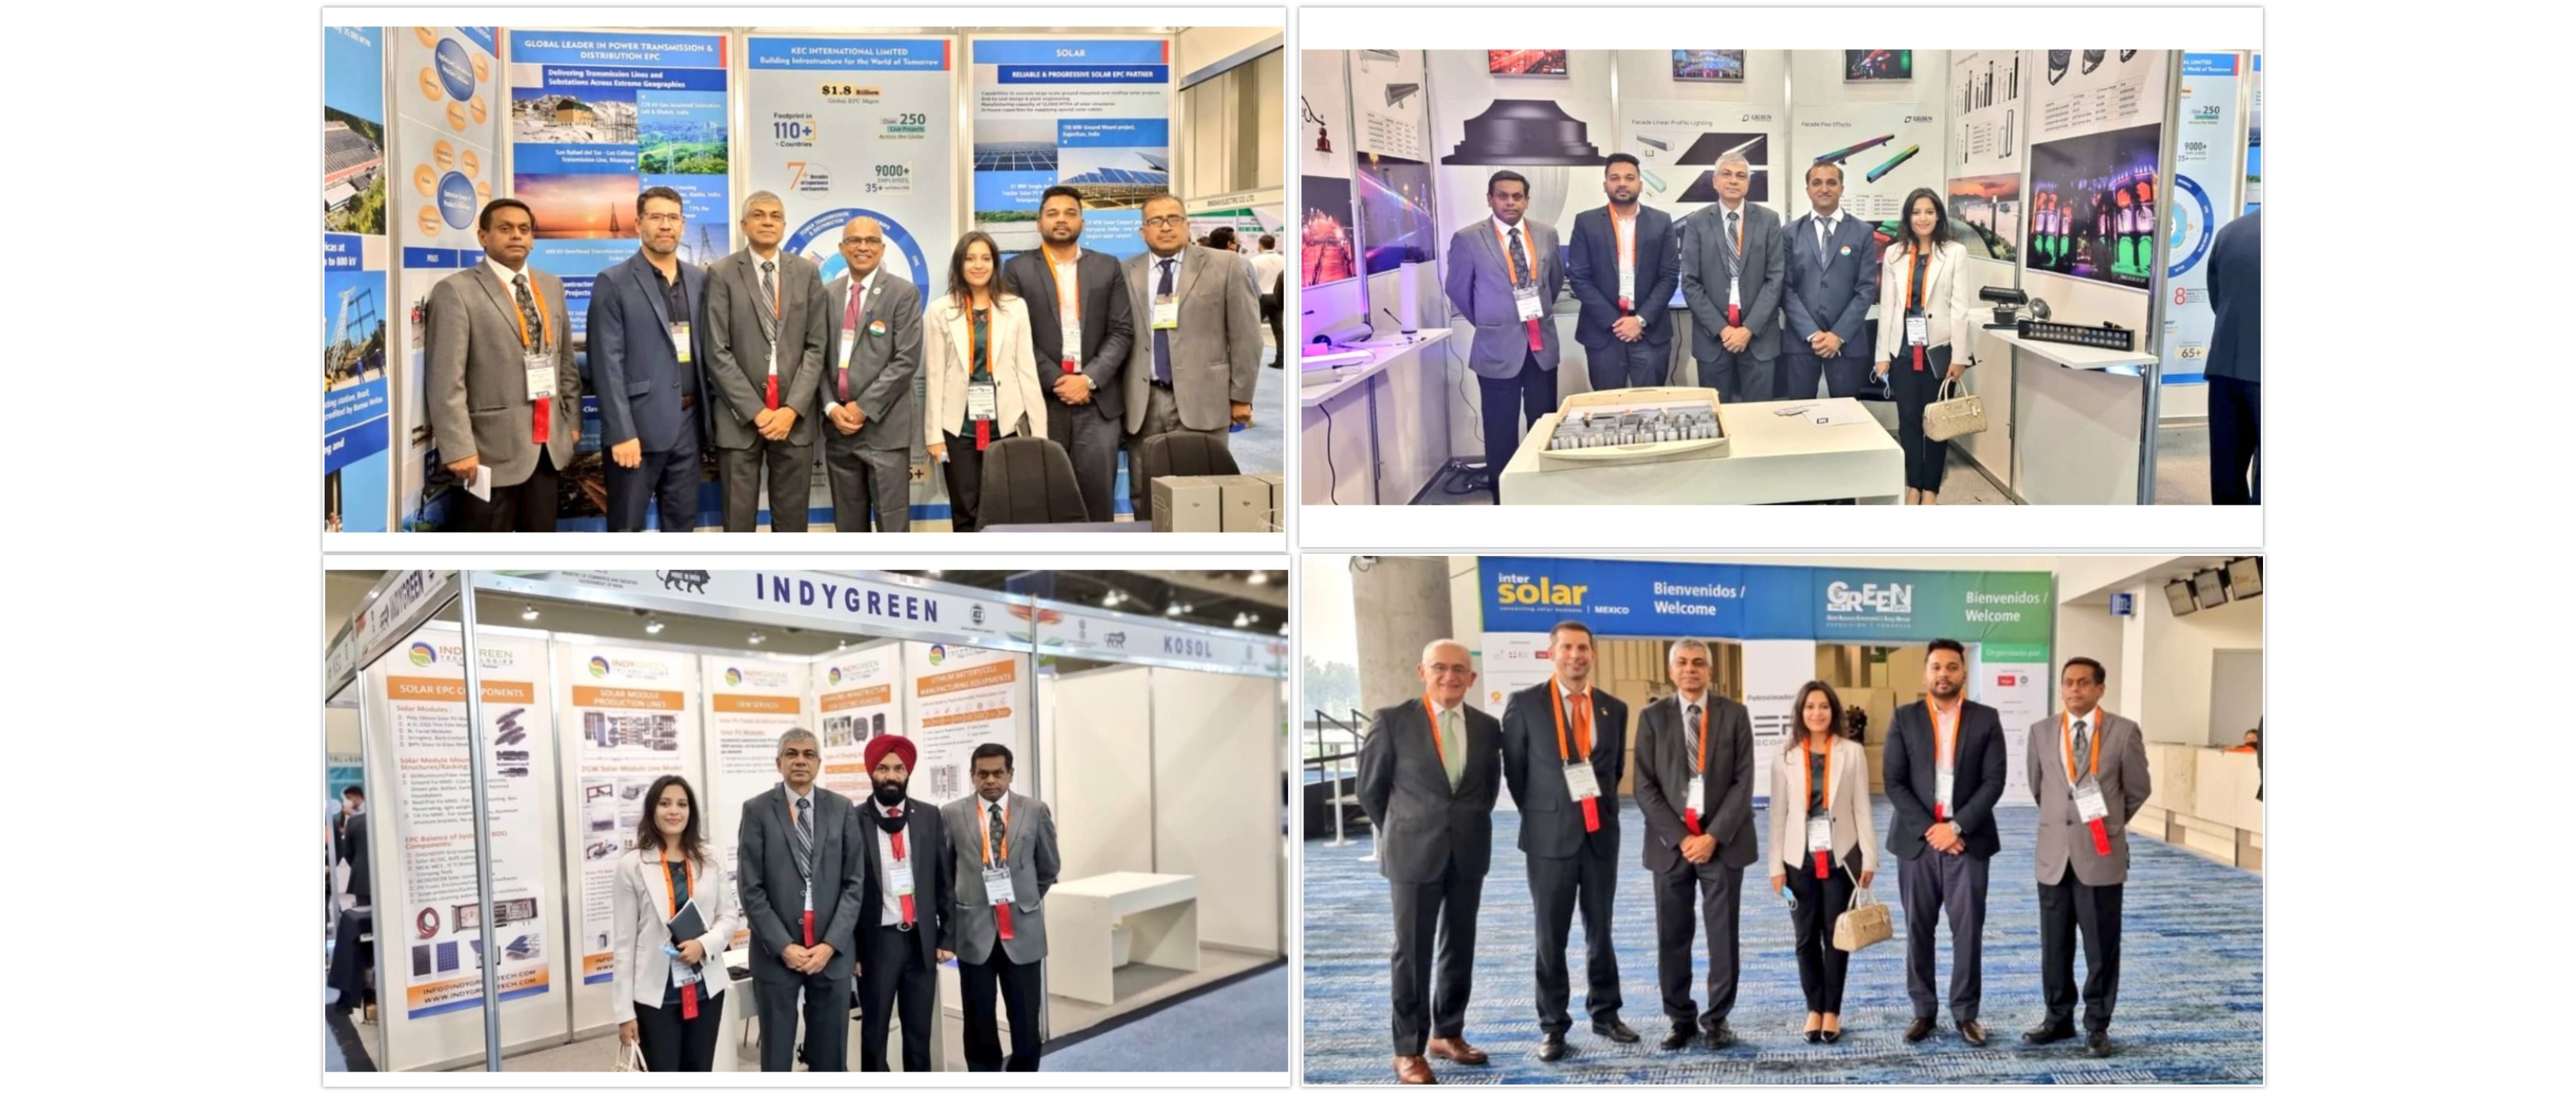  <div style="fcolor: #fff; font-weight: 600; font-size: 1.5em;">
<p style="font-size: 13.8px;">Ambassador Pankaj Sharma and officers from Embassy attended the Intersolar Exhibition being held in México (6-8 Sept). They met with Indian companies at the exhibition. 


<br /><span style="text-align: center;">06 September 2022</span></p>
</div>